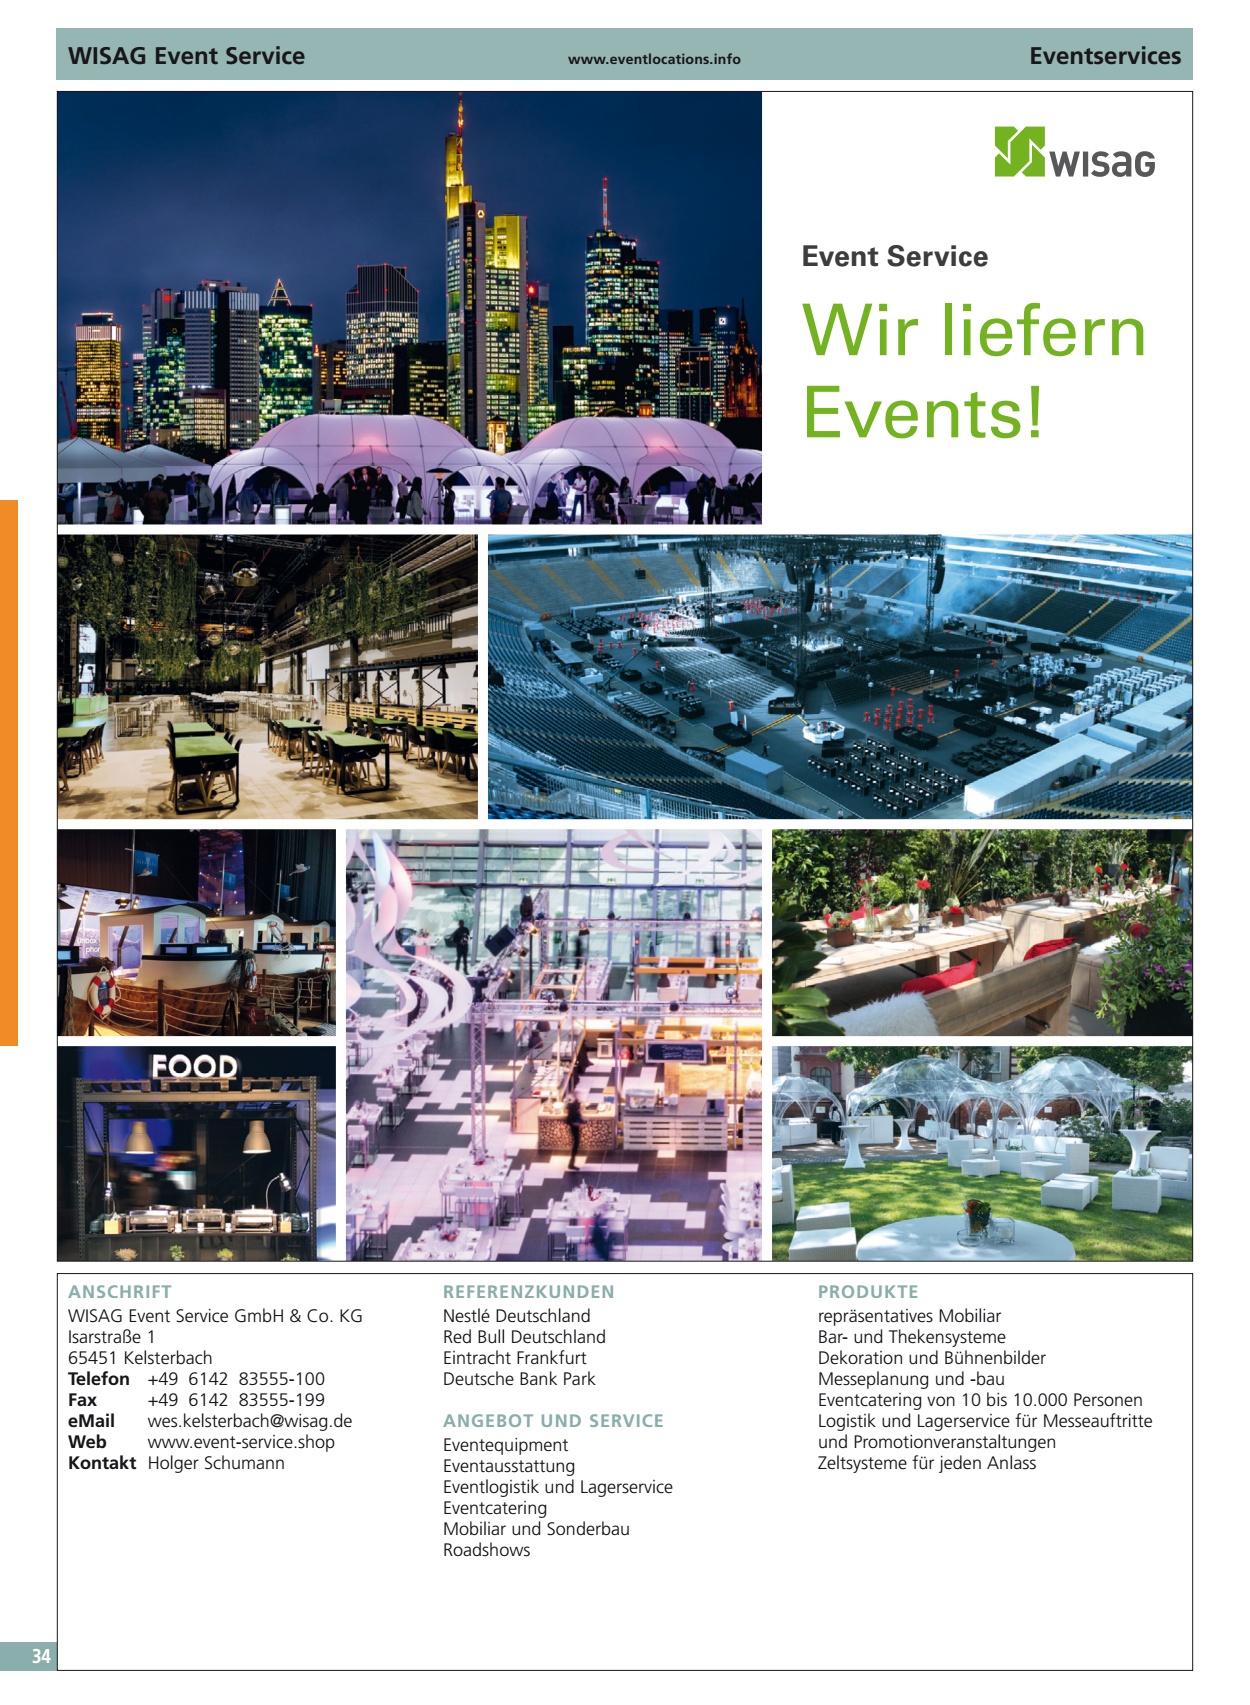 Event WISAG Eventservices